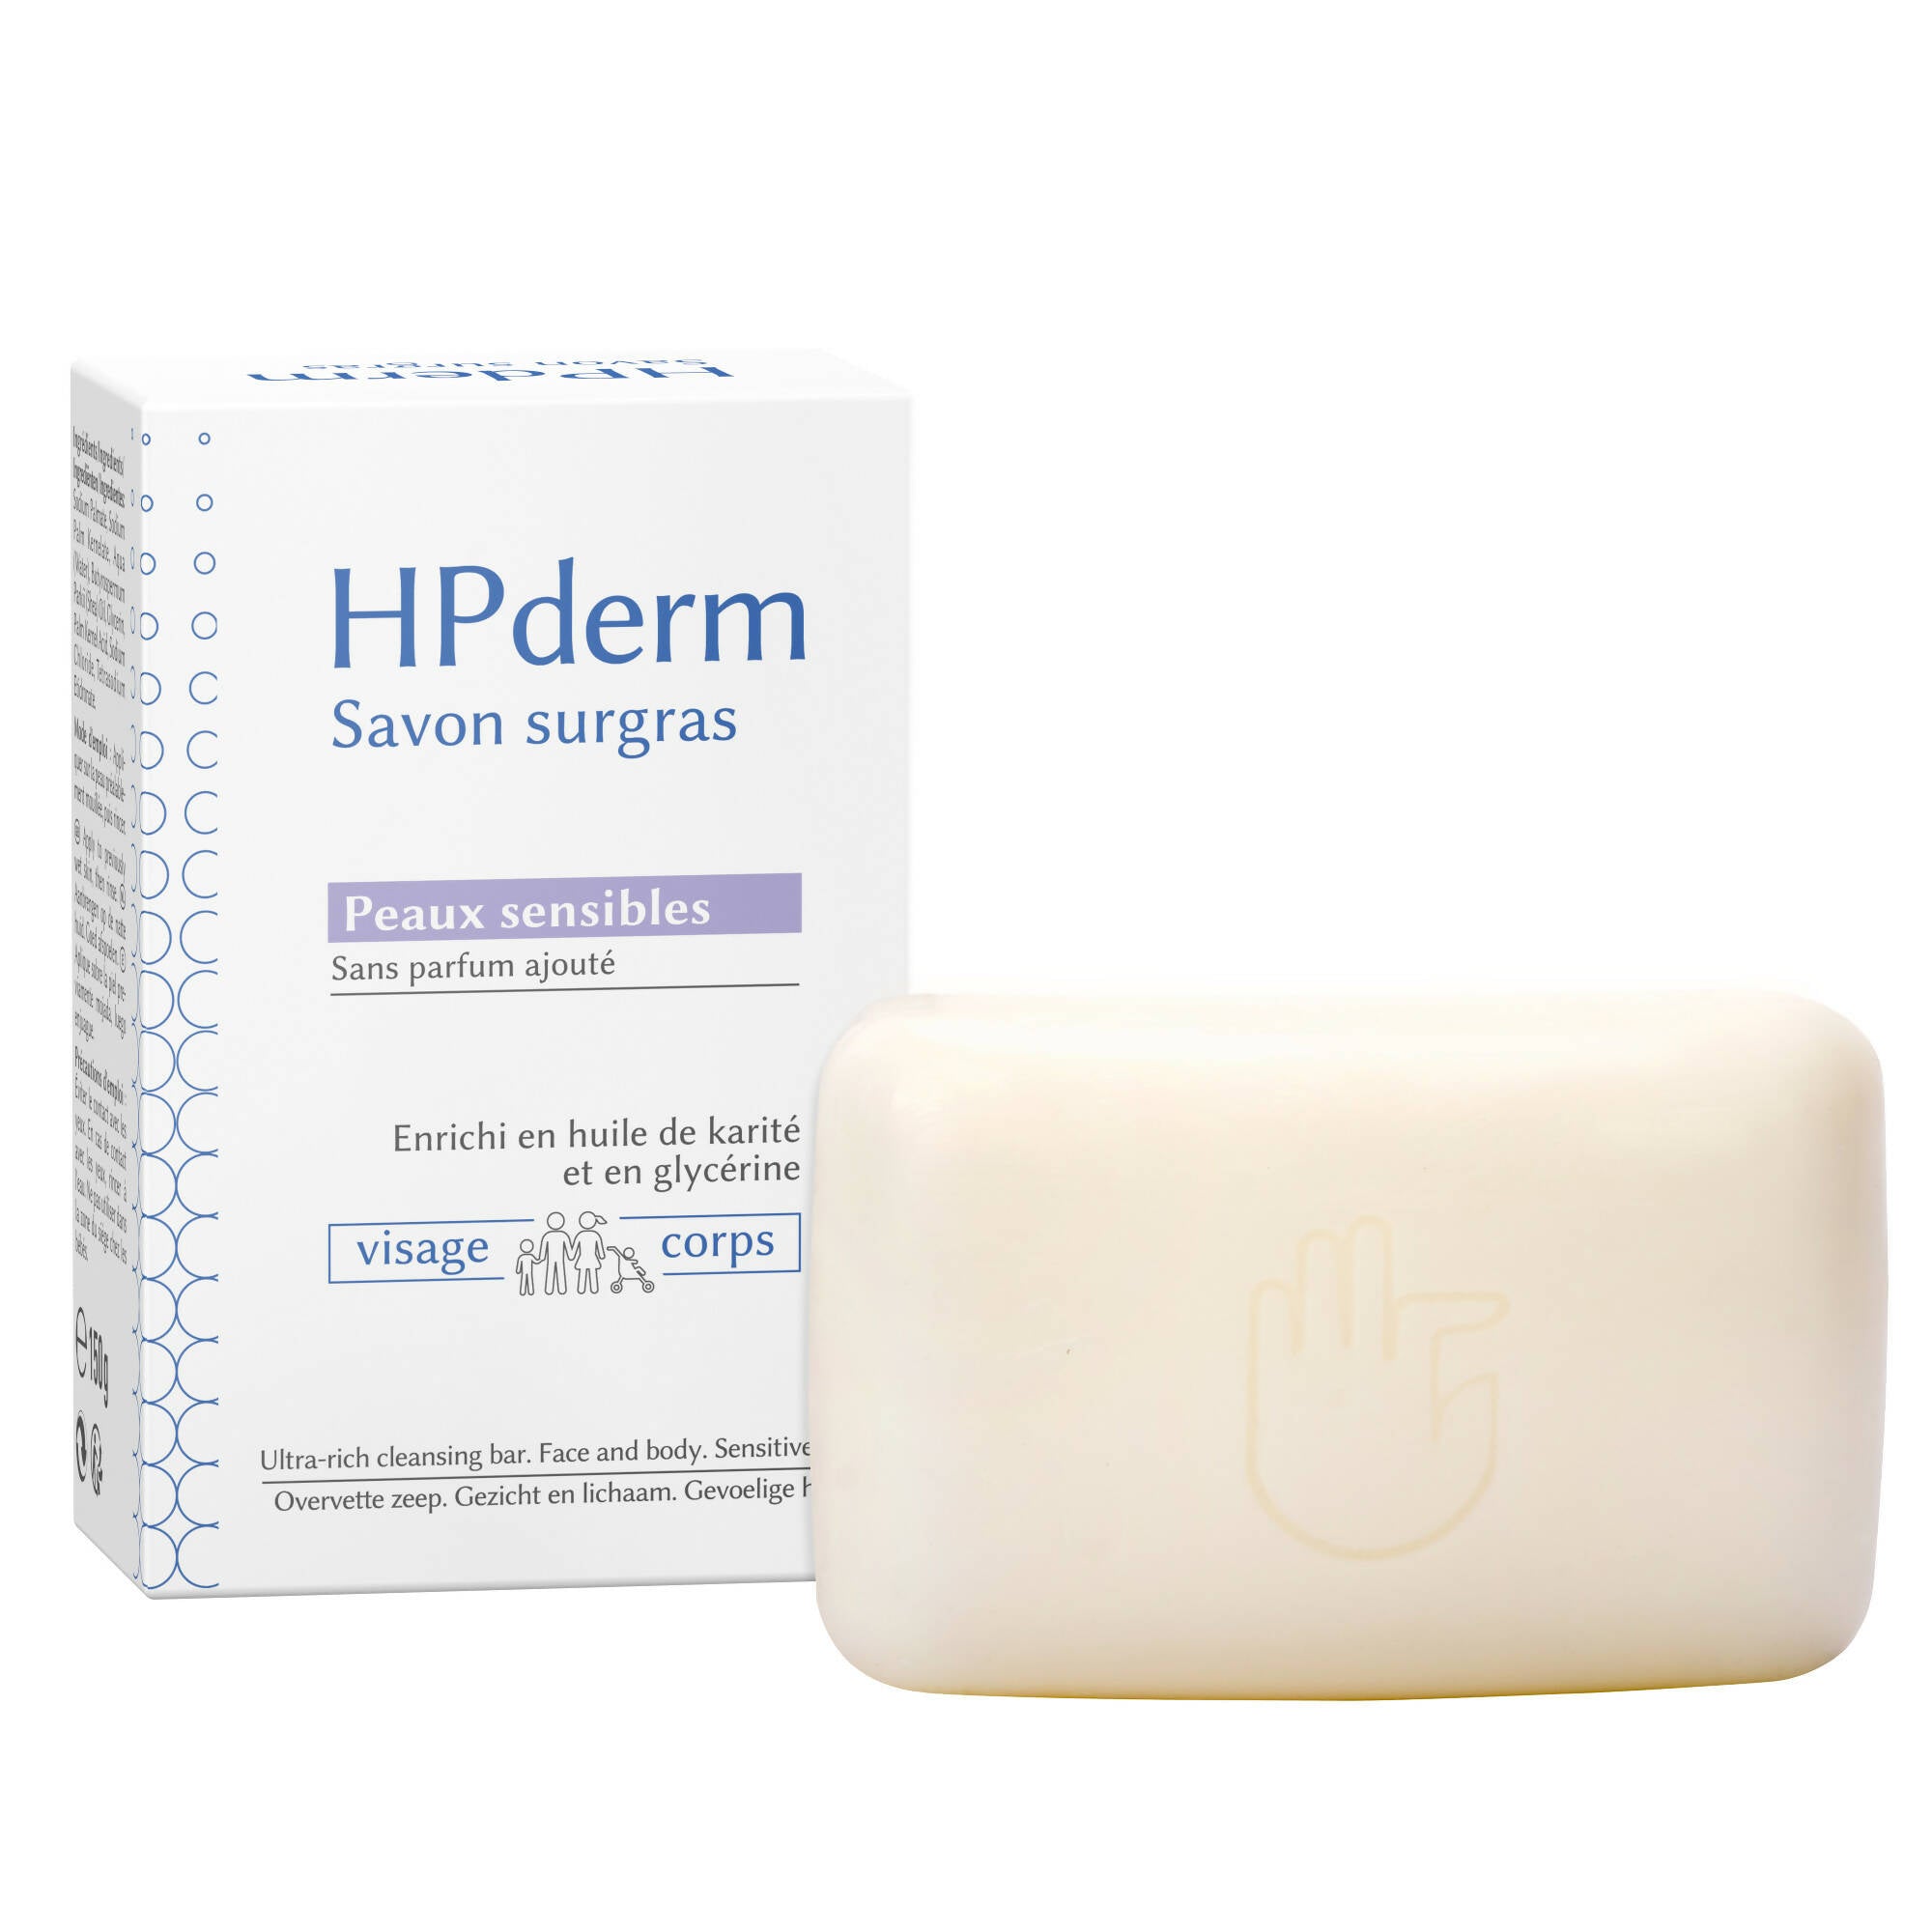 SORIFA - HPderm Surgras soap - Sensitive skin - 99.95% natural ingredients - Enriched with shea oil and glycerin - Family including infants - Neutral pH, fragrance-free - Bar 150 gr